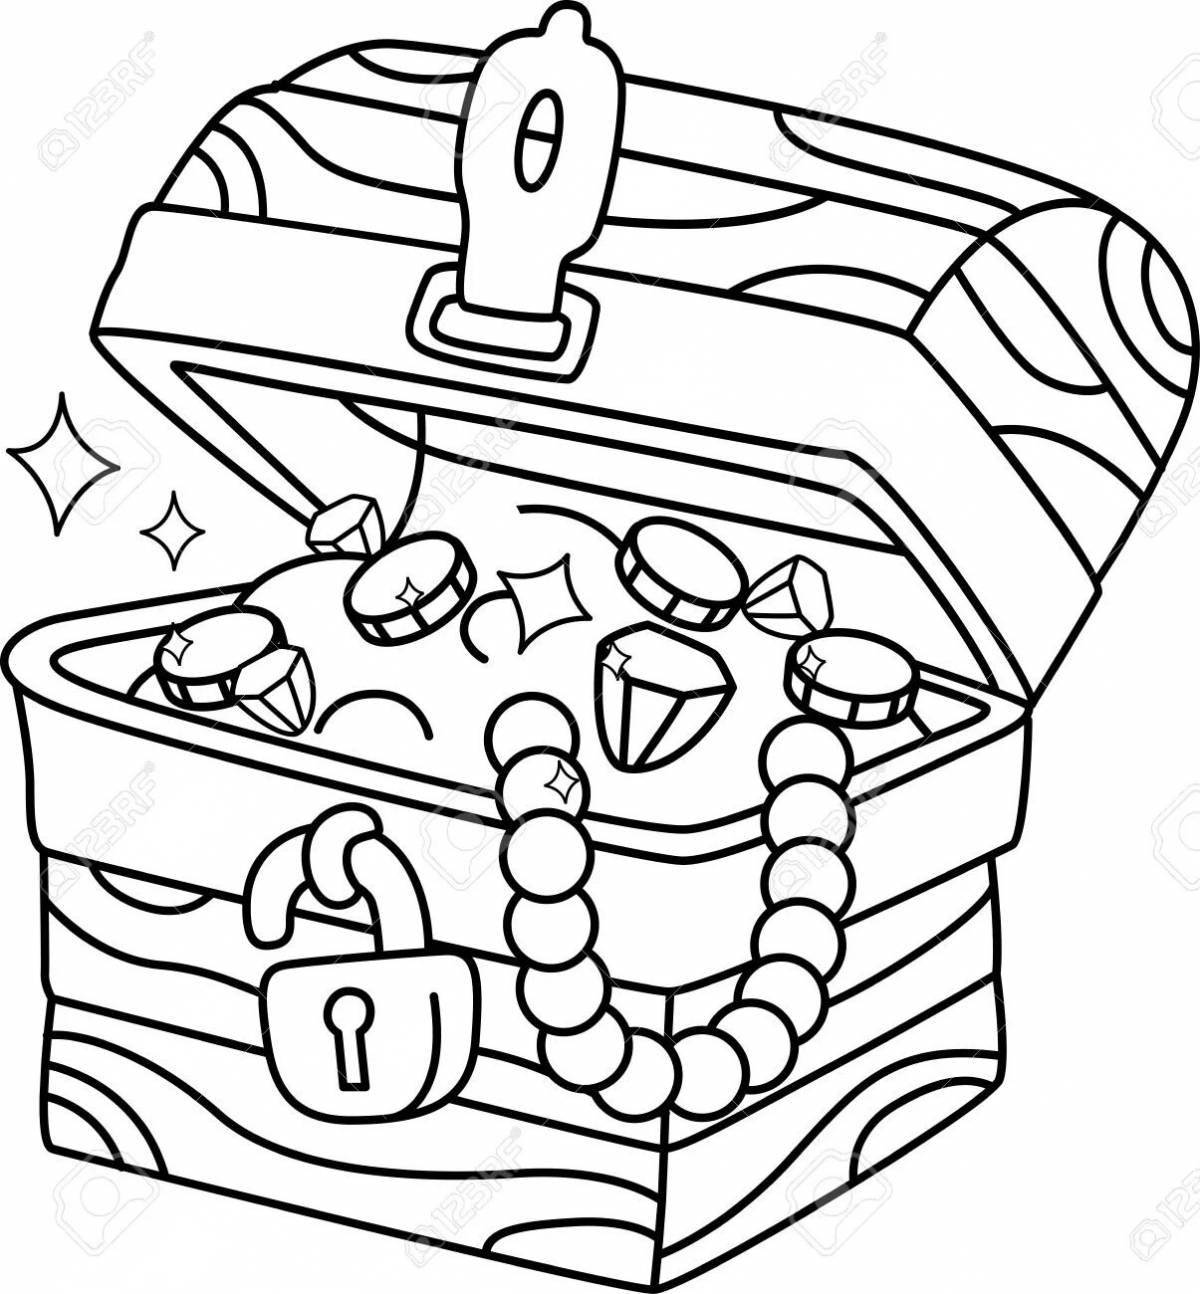 Dazzling treasure chest coloring page